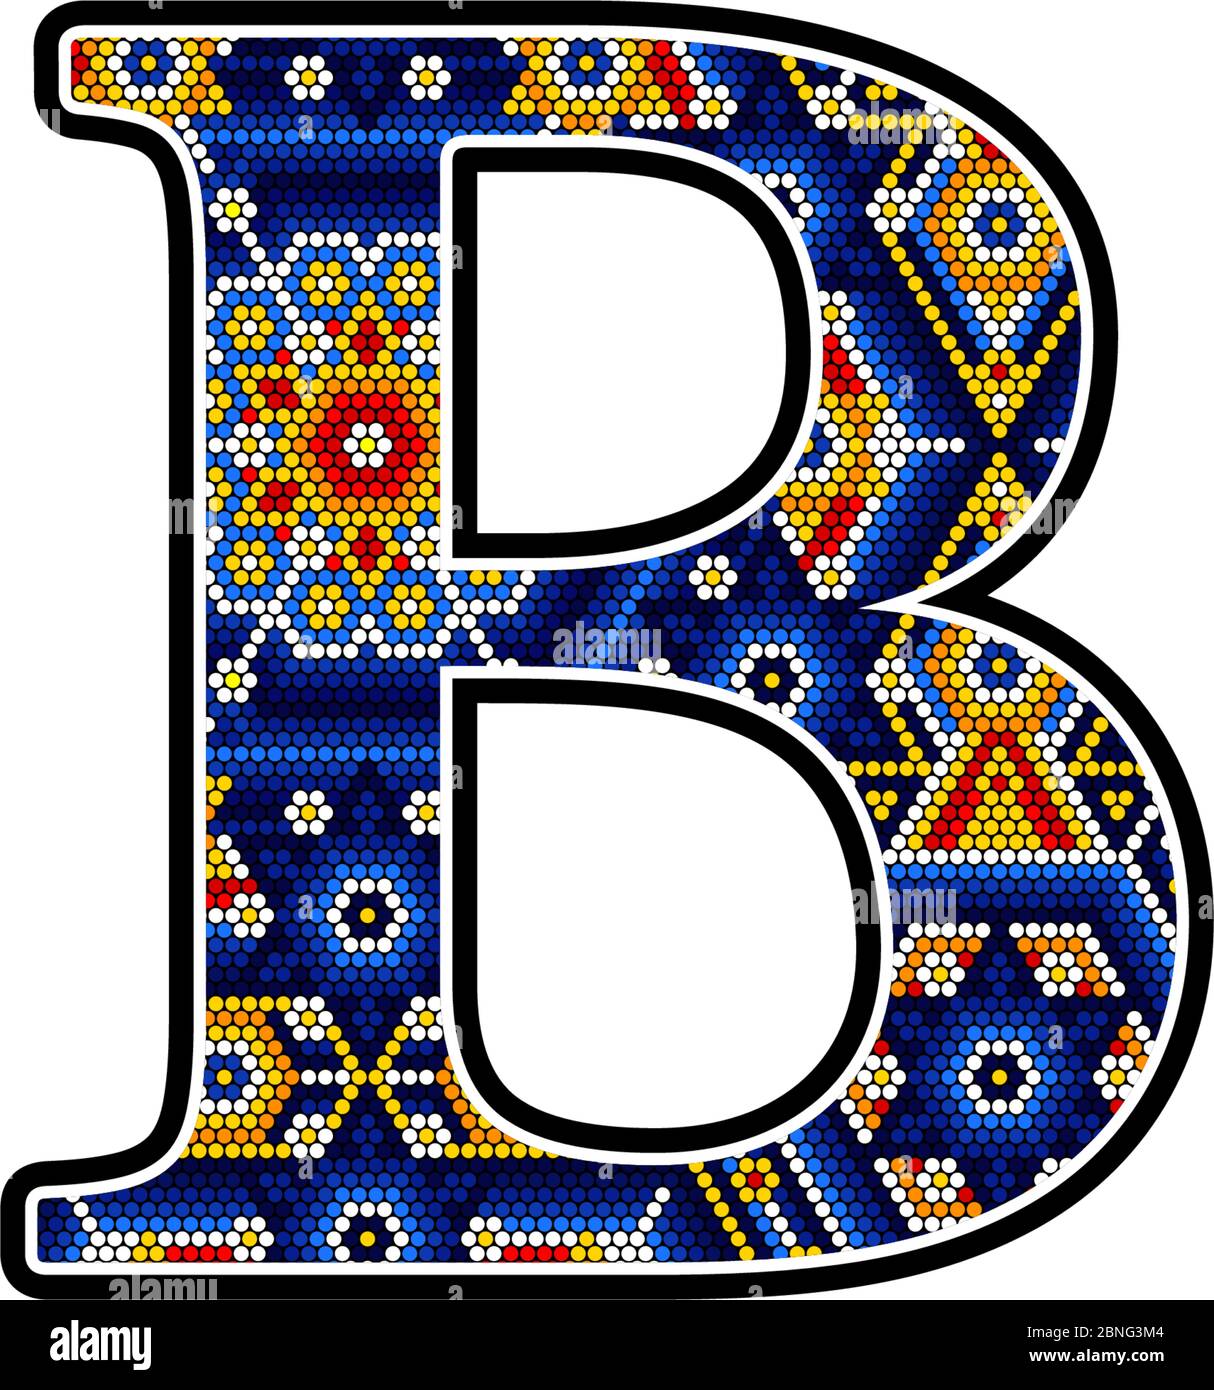 initial capital letter B with colorful dots. Abstract design inspired in mexican huichol craft art style. Isolated on white background Stock Vector